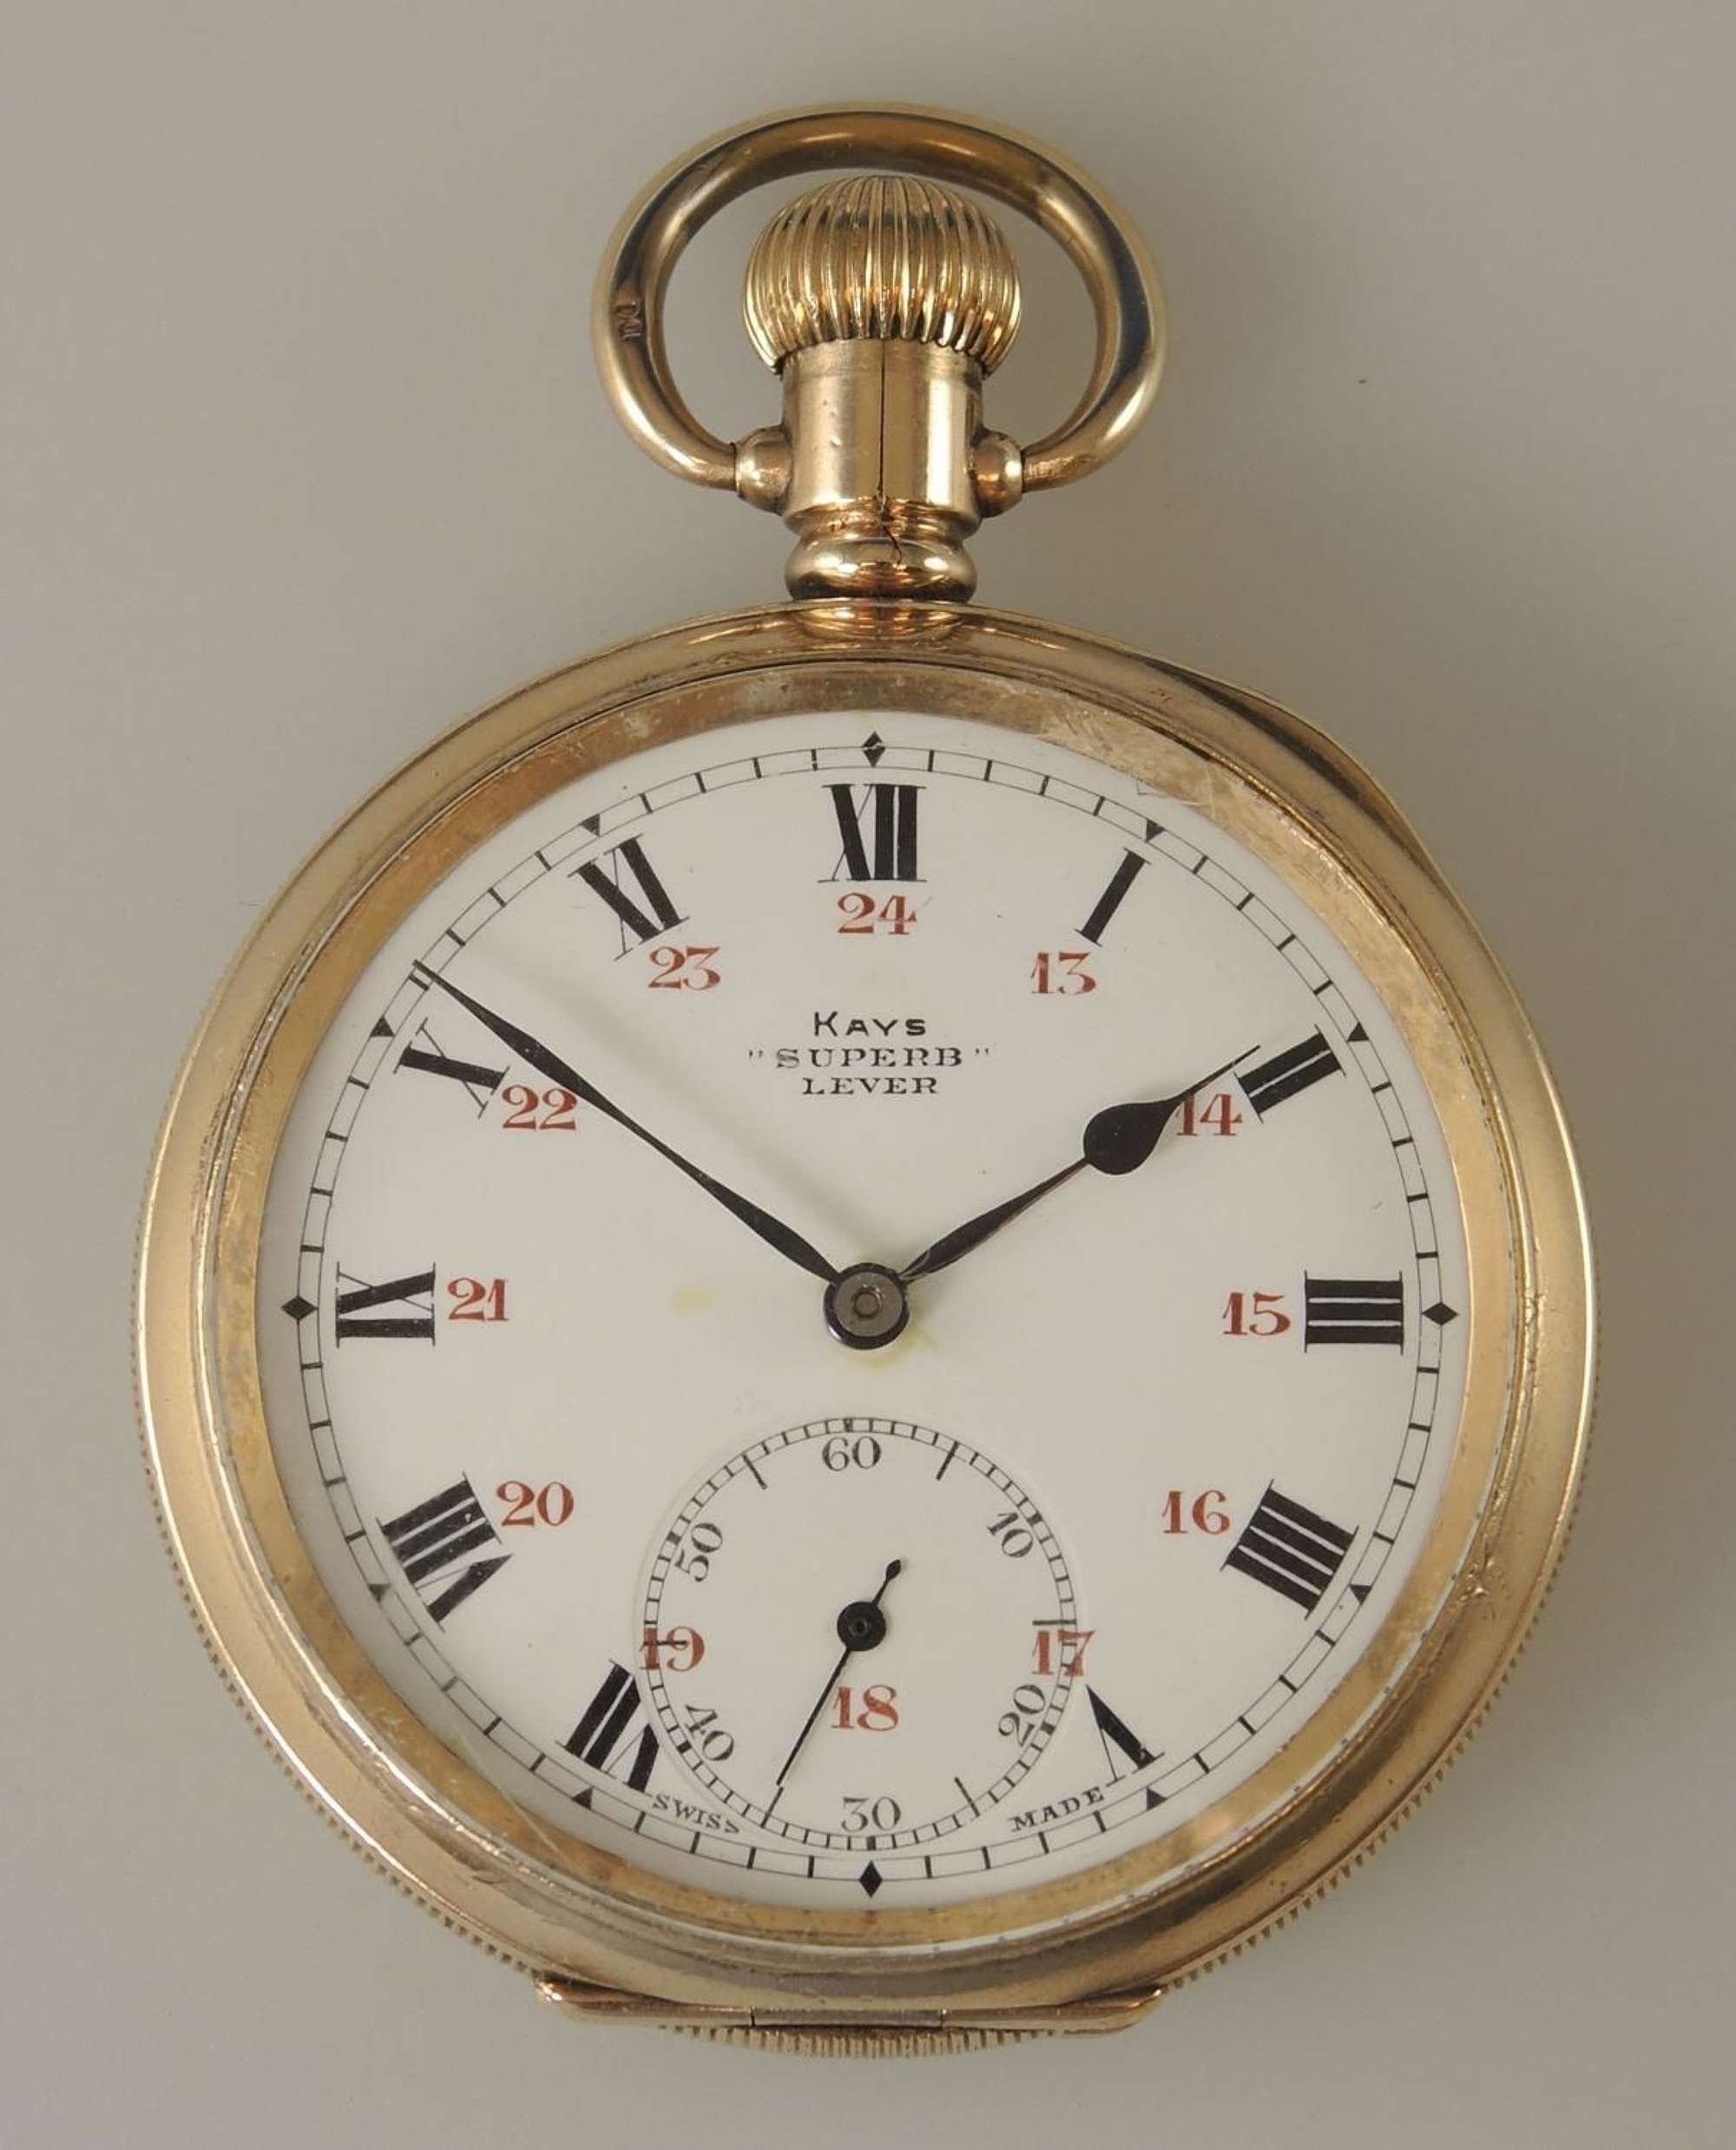 Clean Gold Plated Pocket Watch by Keys with a 24 Hour Dial. c1910